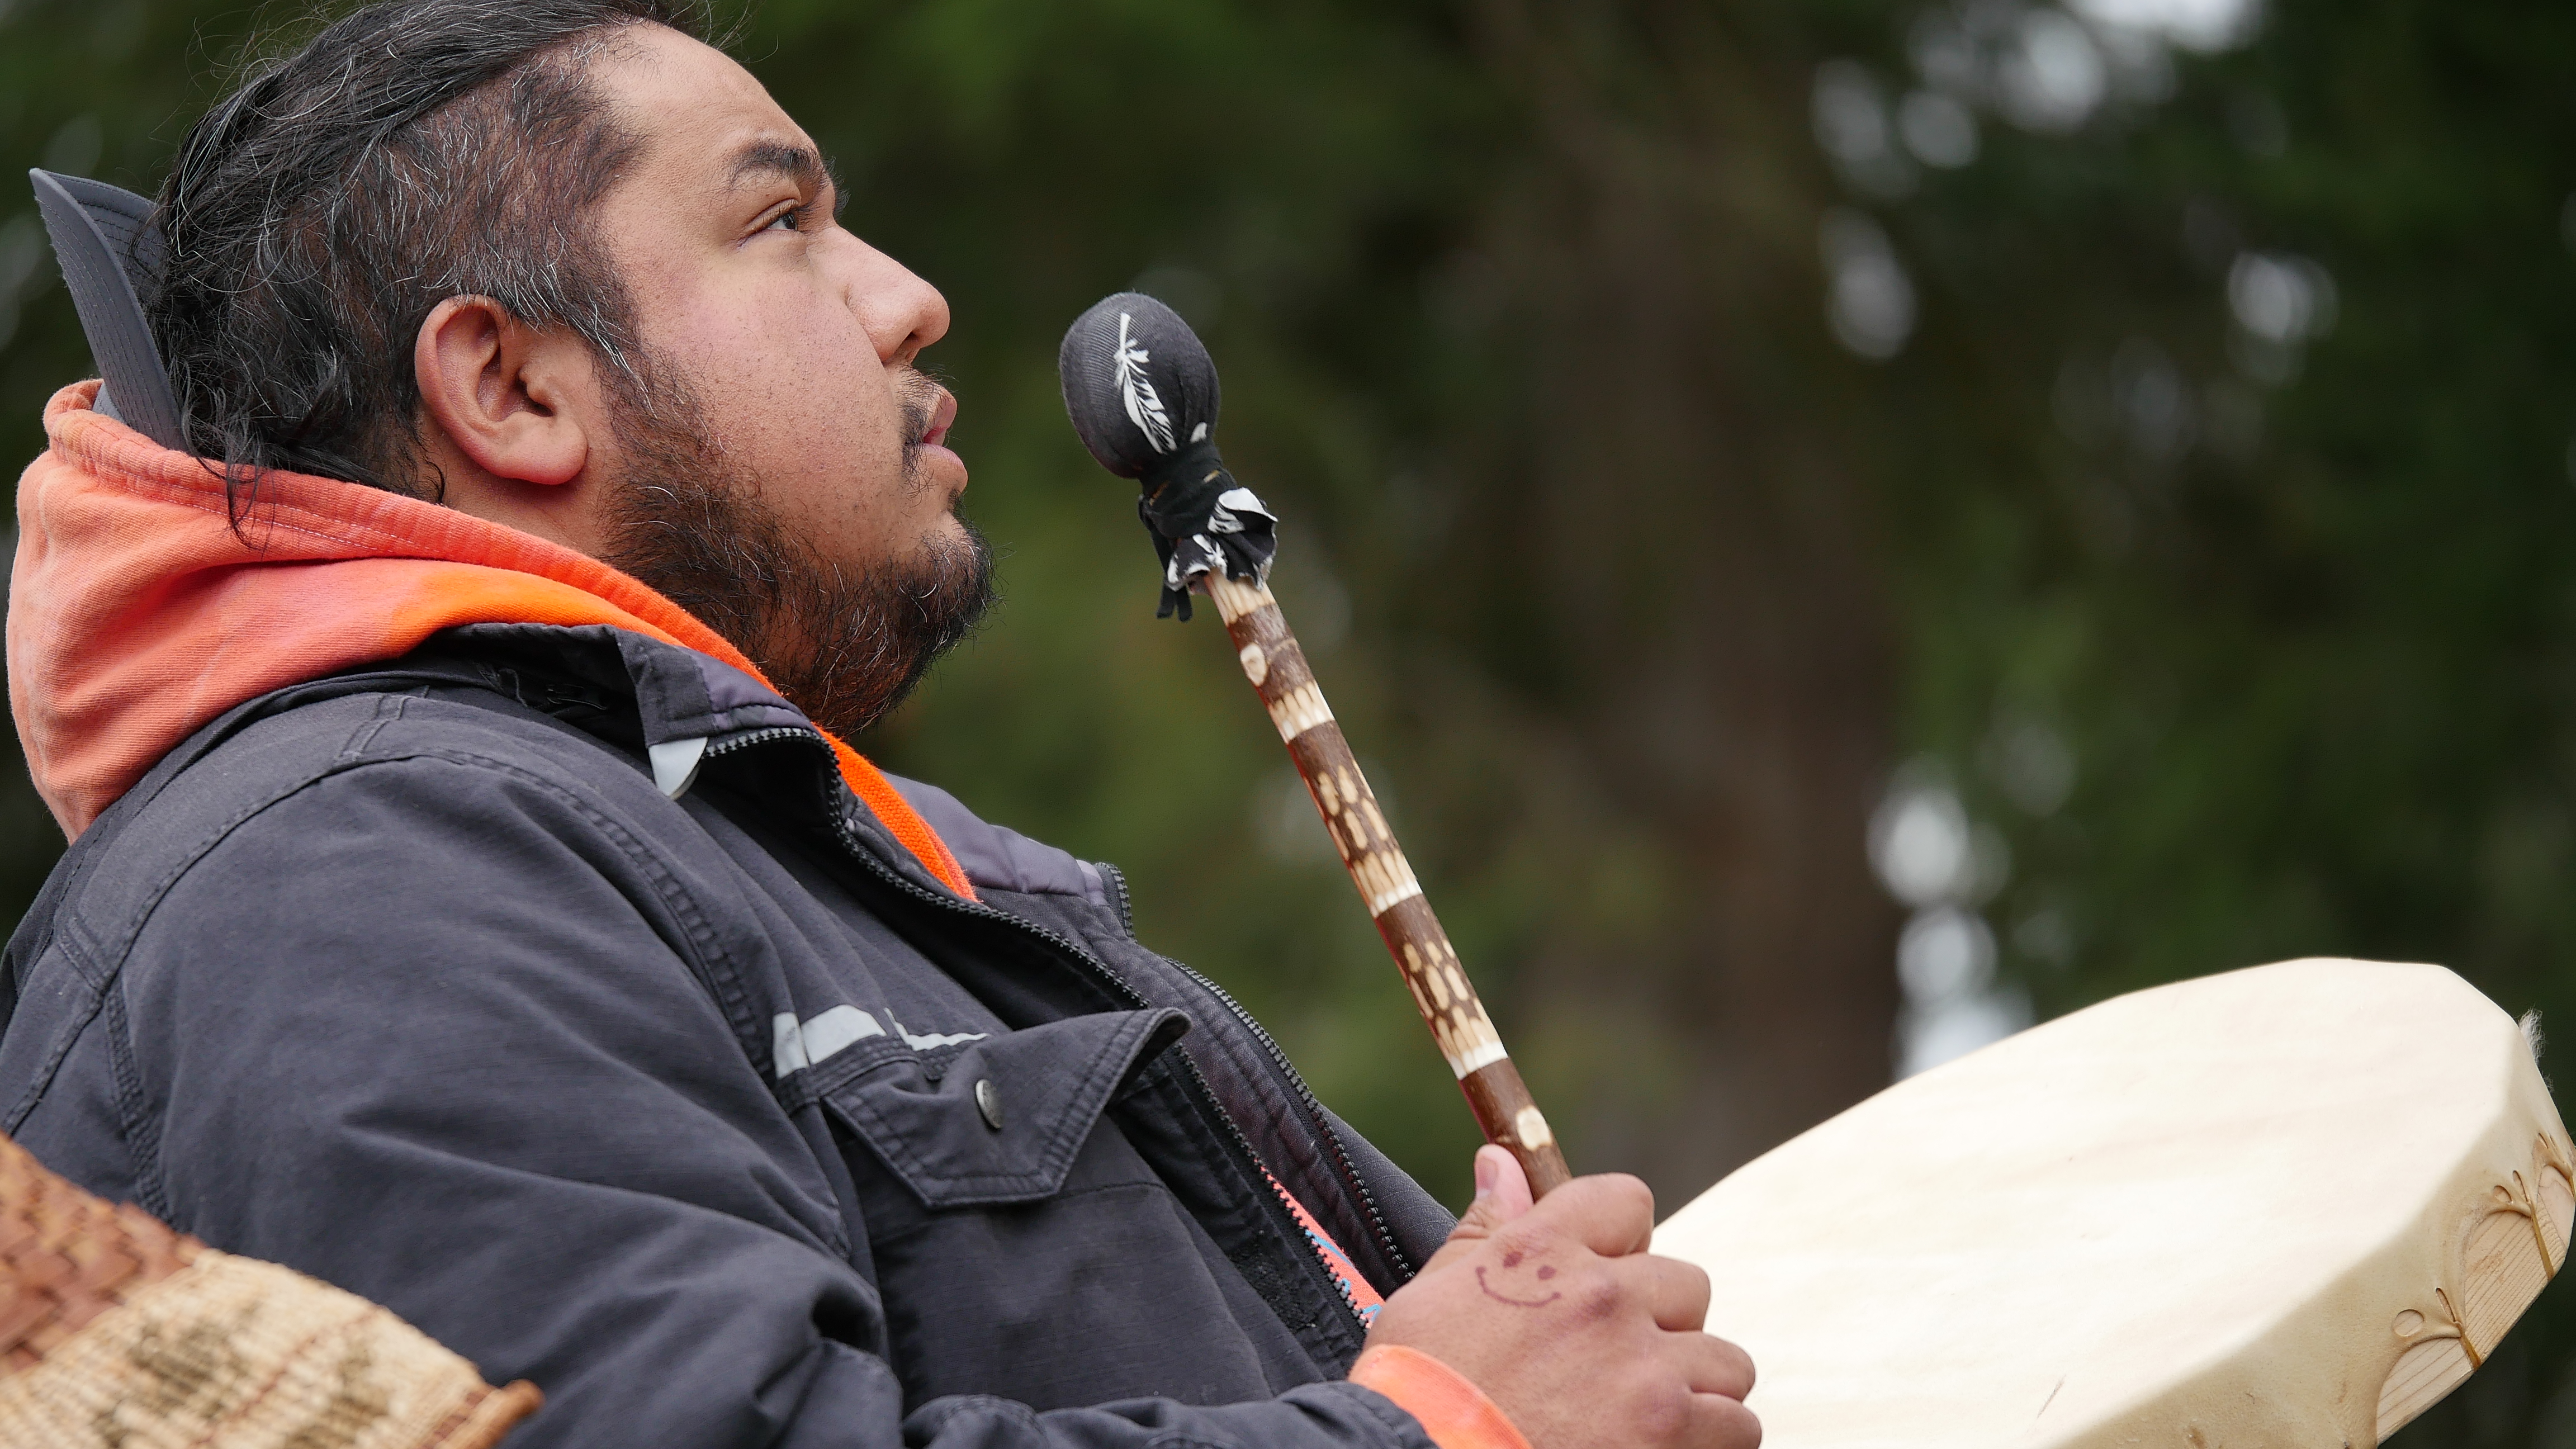 A man looks to the skies as he plays a hand drum. He is standing outdoors.